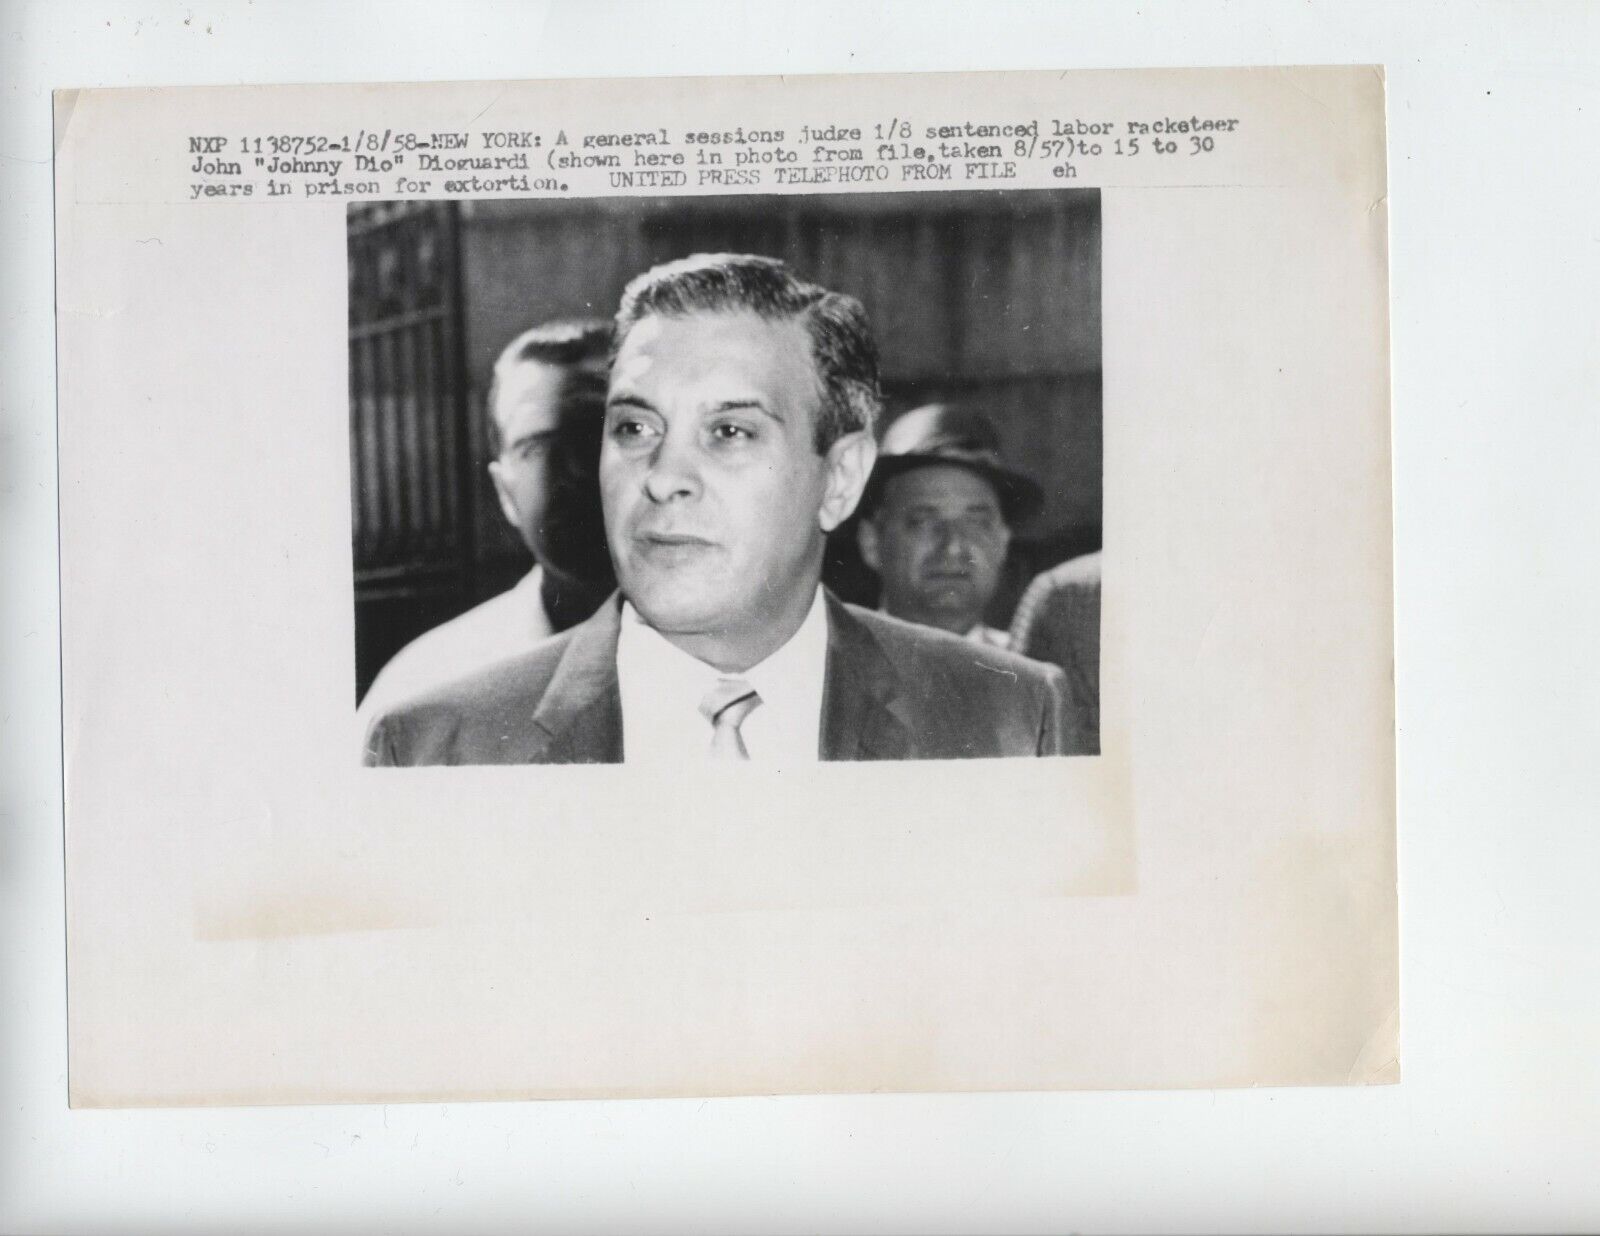 1958 JOHNNY DIO GANGSTER VINTAGE PHOTO MOB LABOR RACKETEER ORGANIZED CRIME